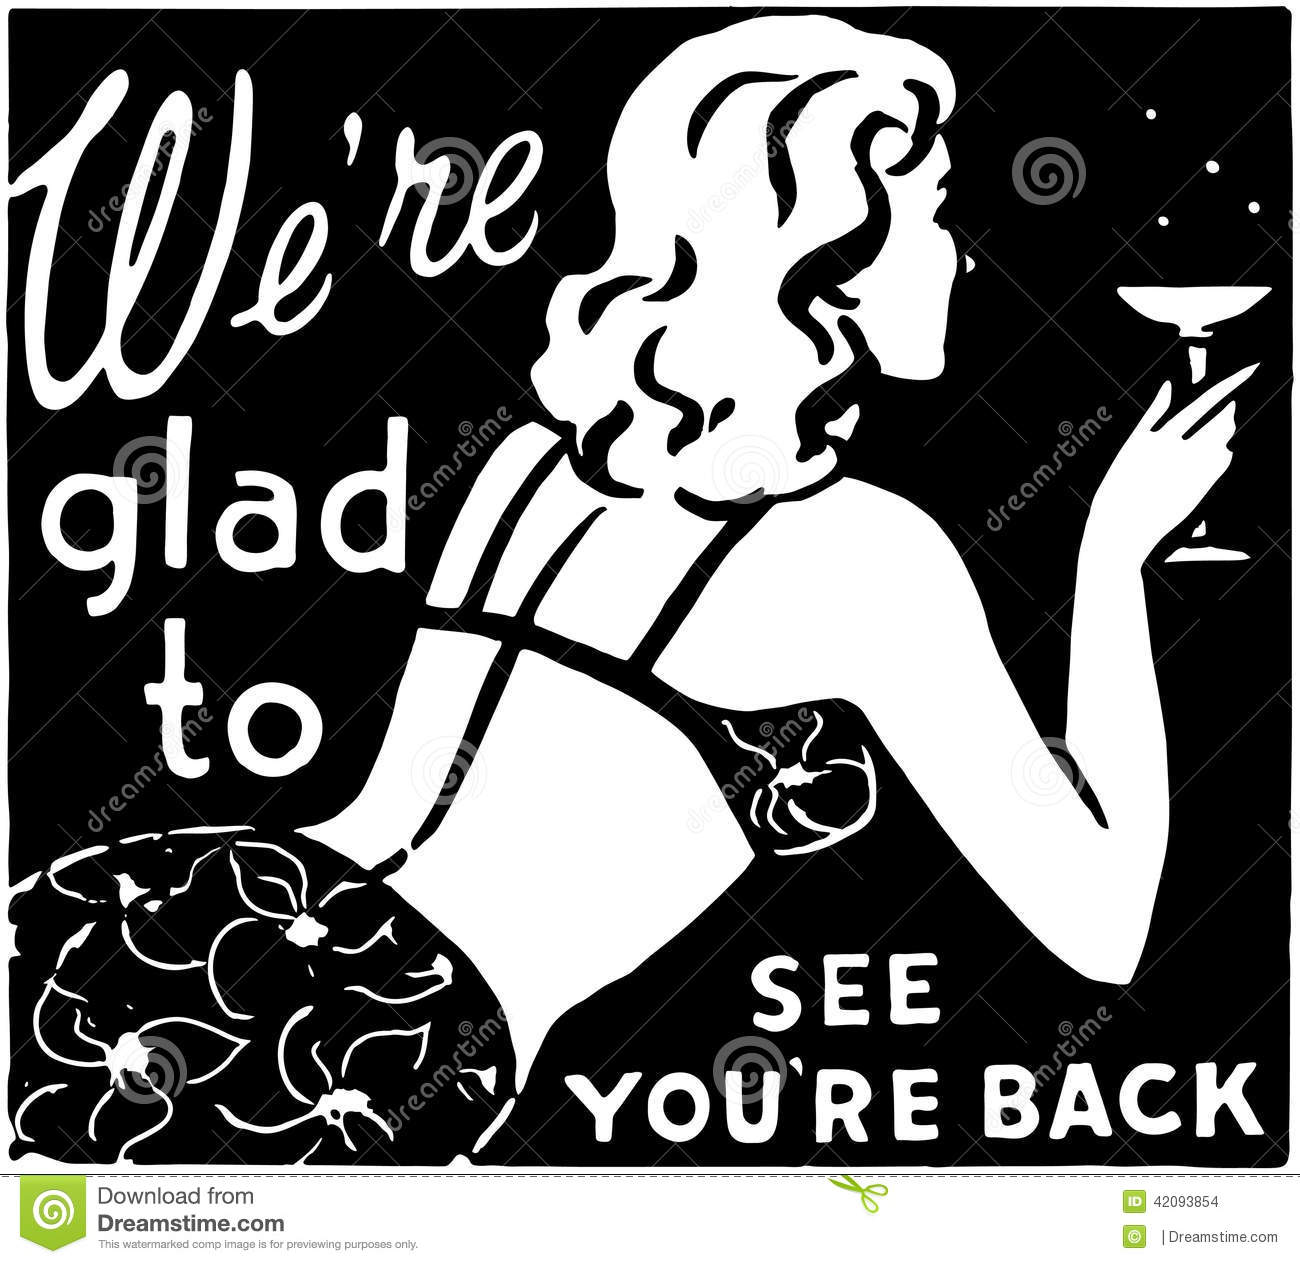 We Re Glad To See You Re Back 3 Stock Vector   Image  42093854